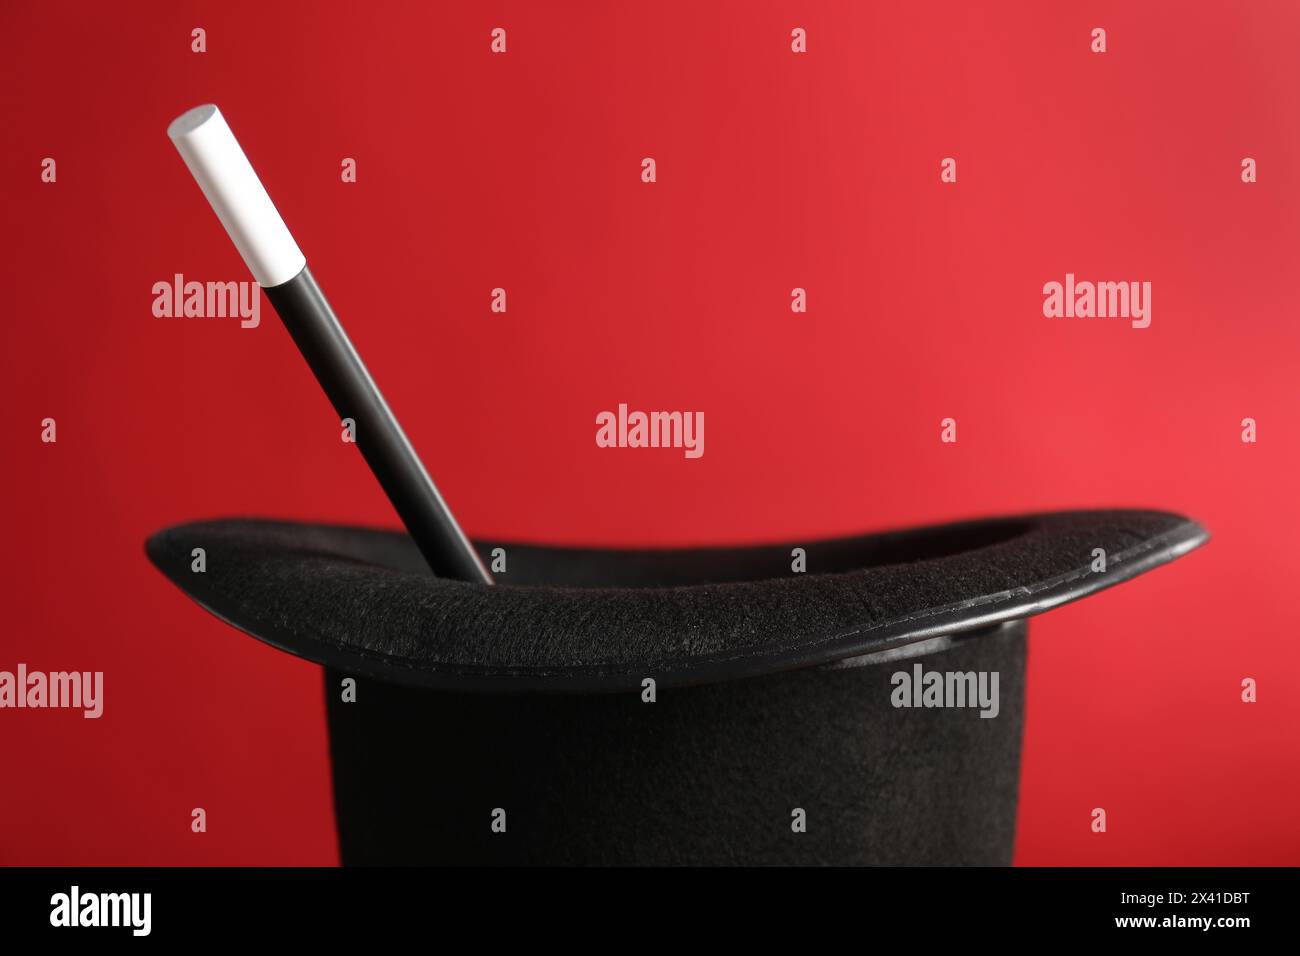 Black magician's hat and wand on red background, closeup Stock Photo